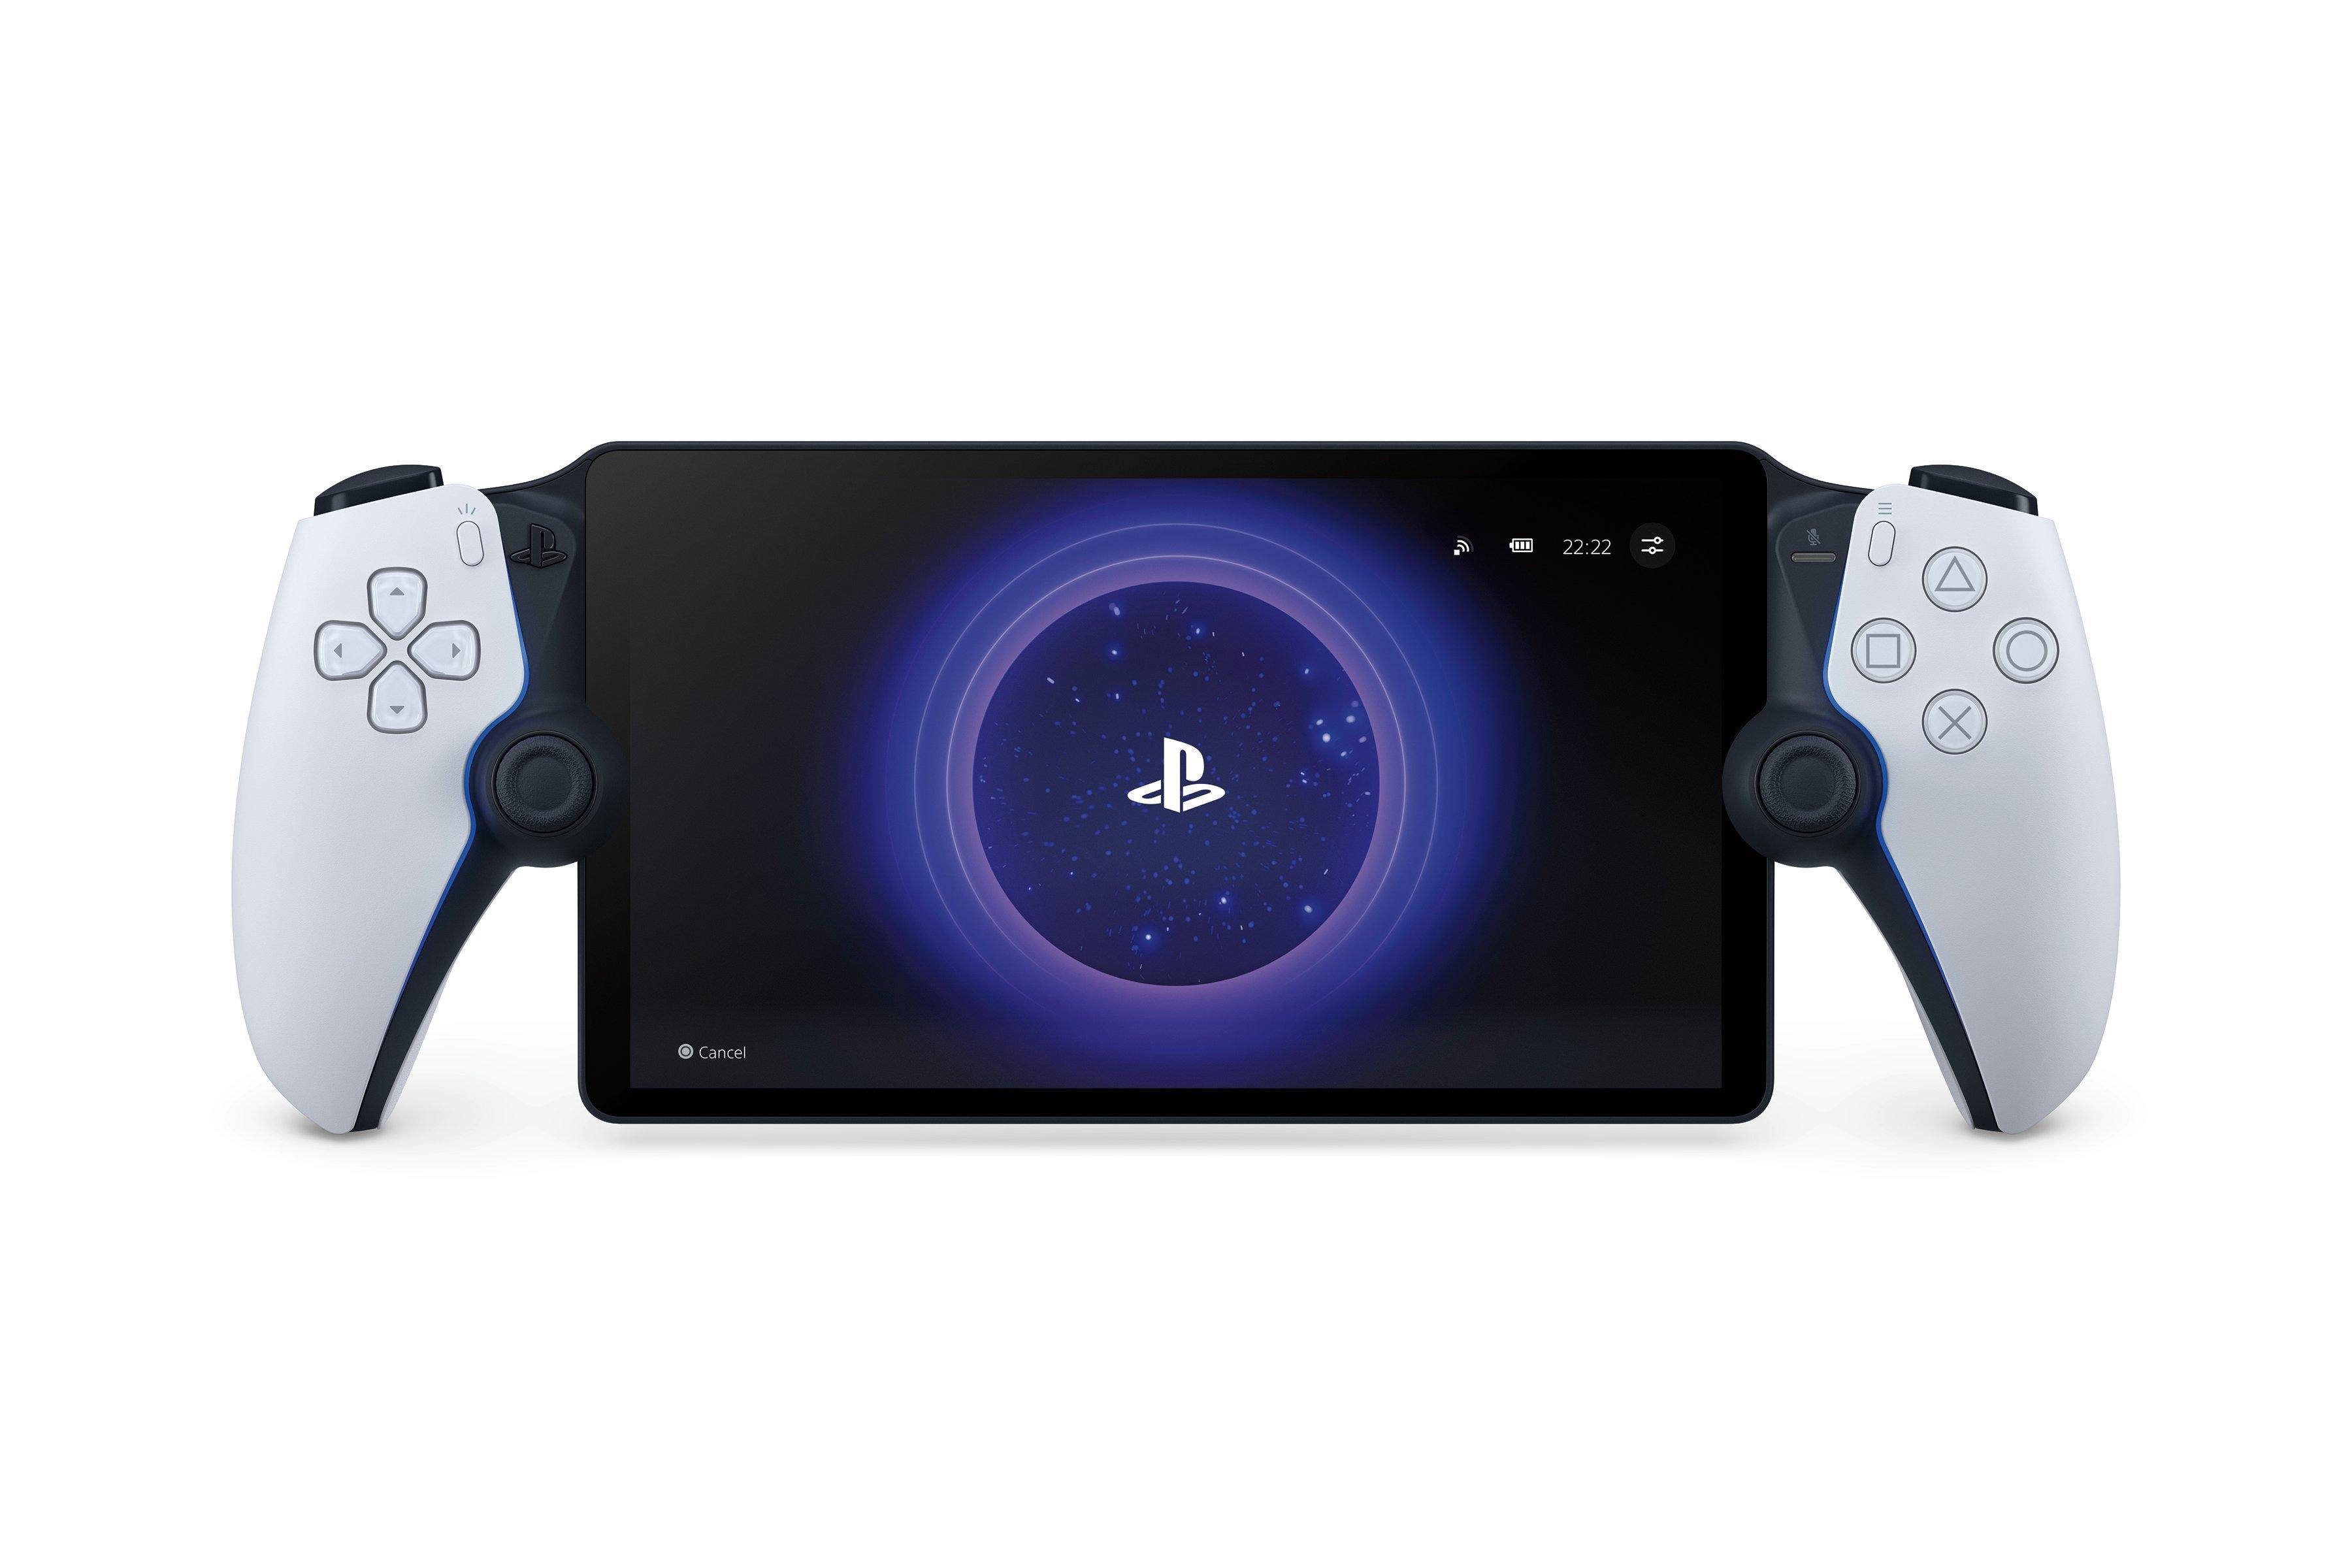 PlayStation Portal: Sony's Remote Player Falls Flat. Here's Why